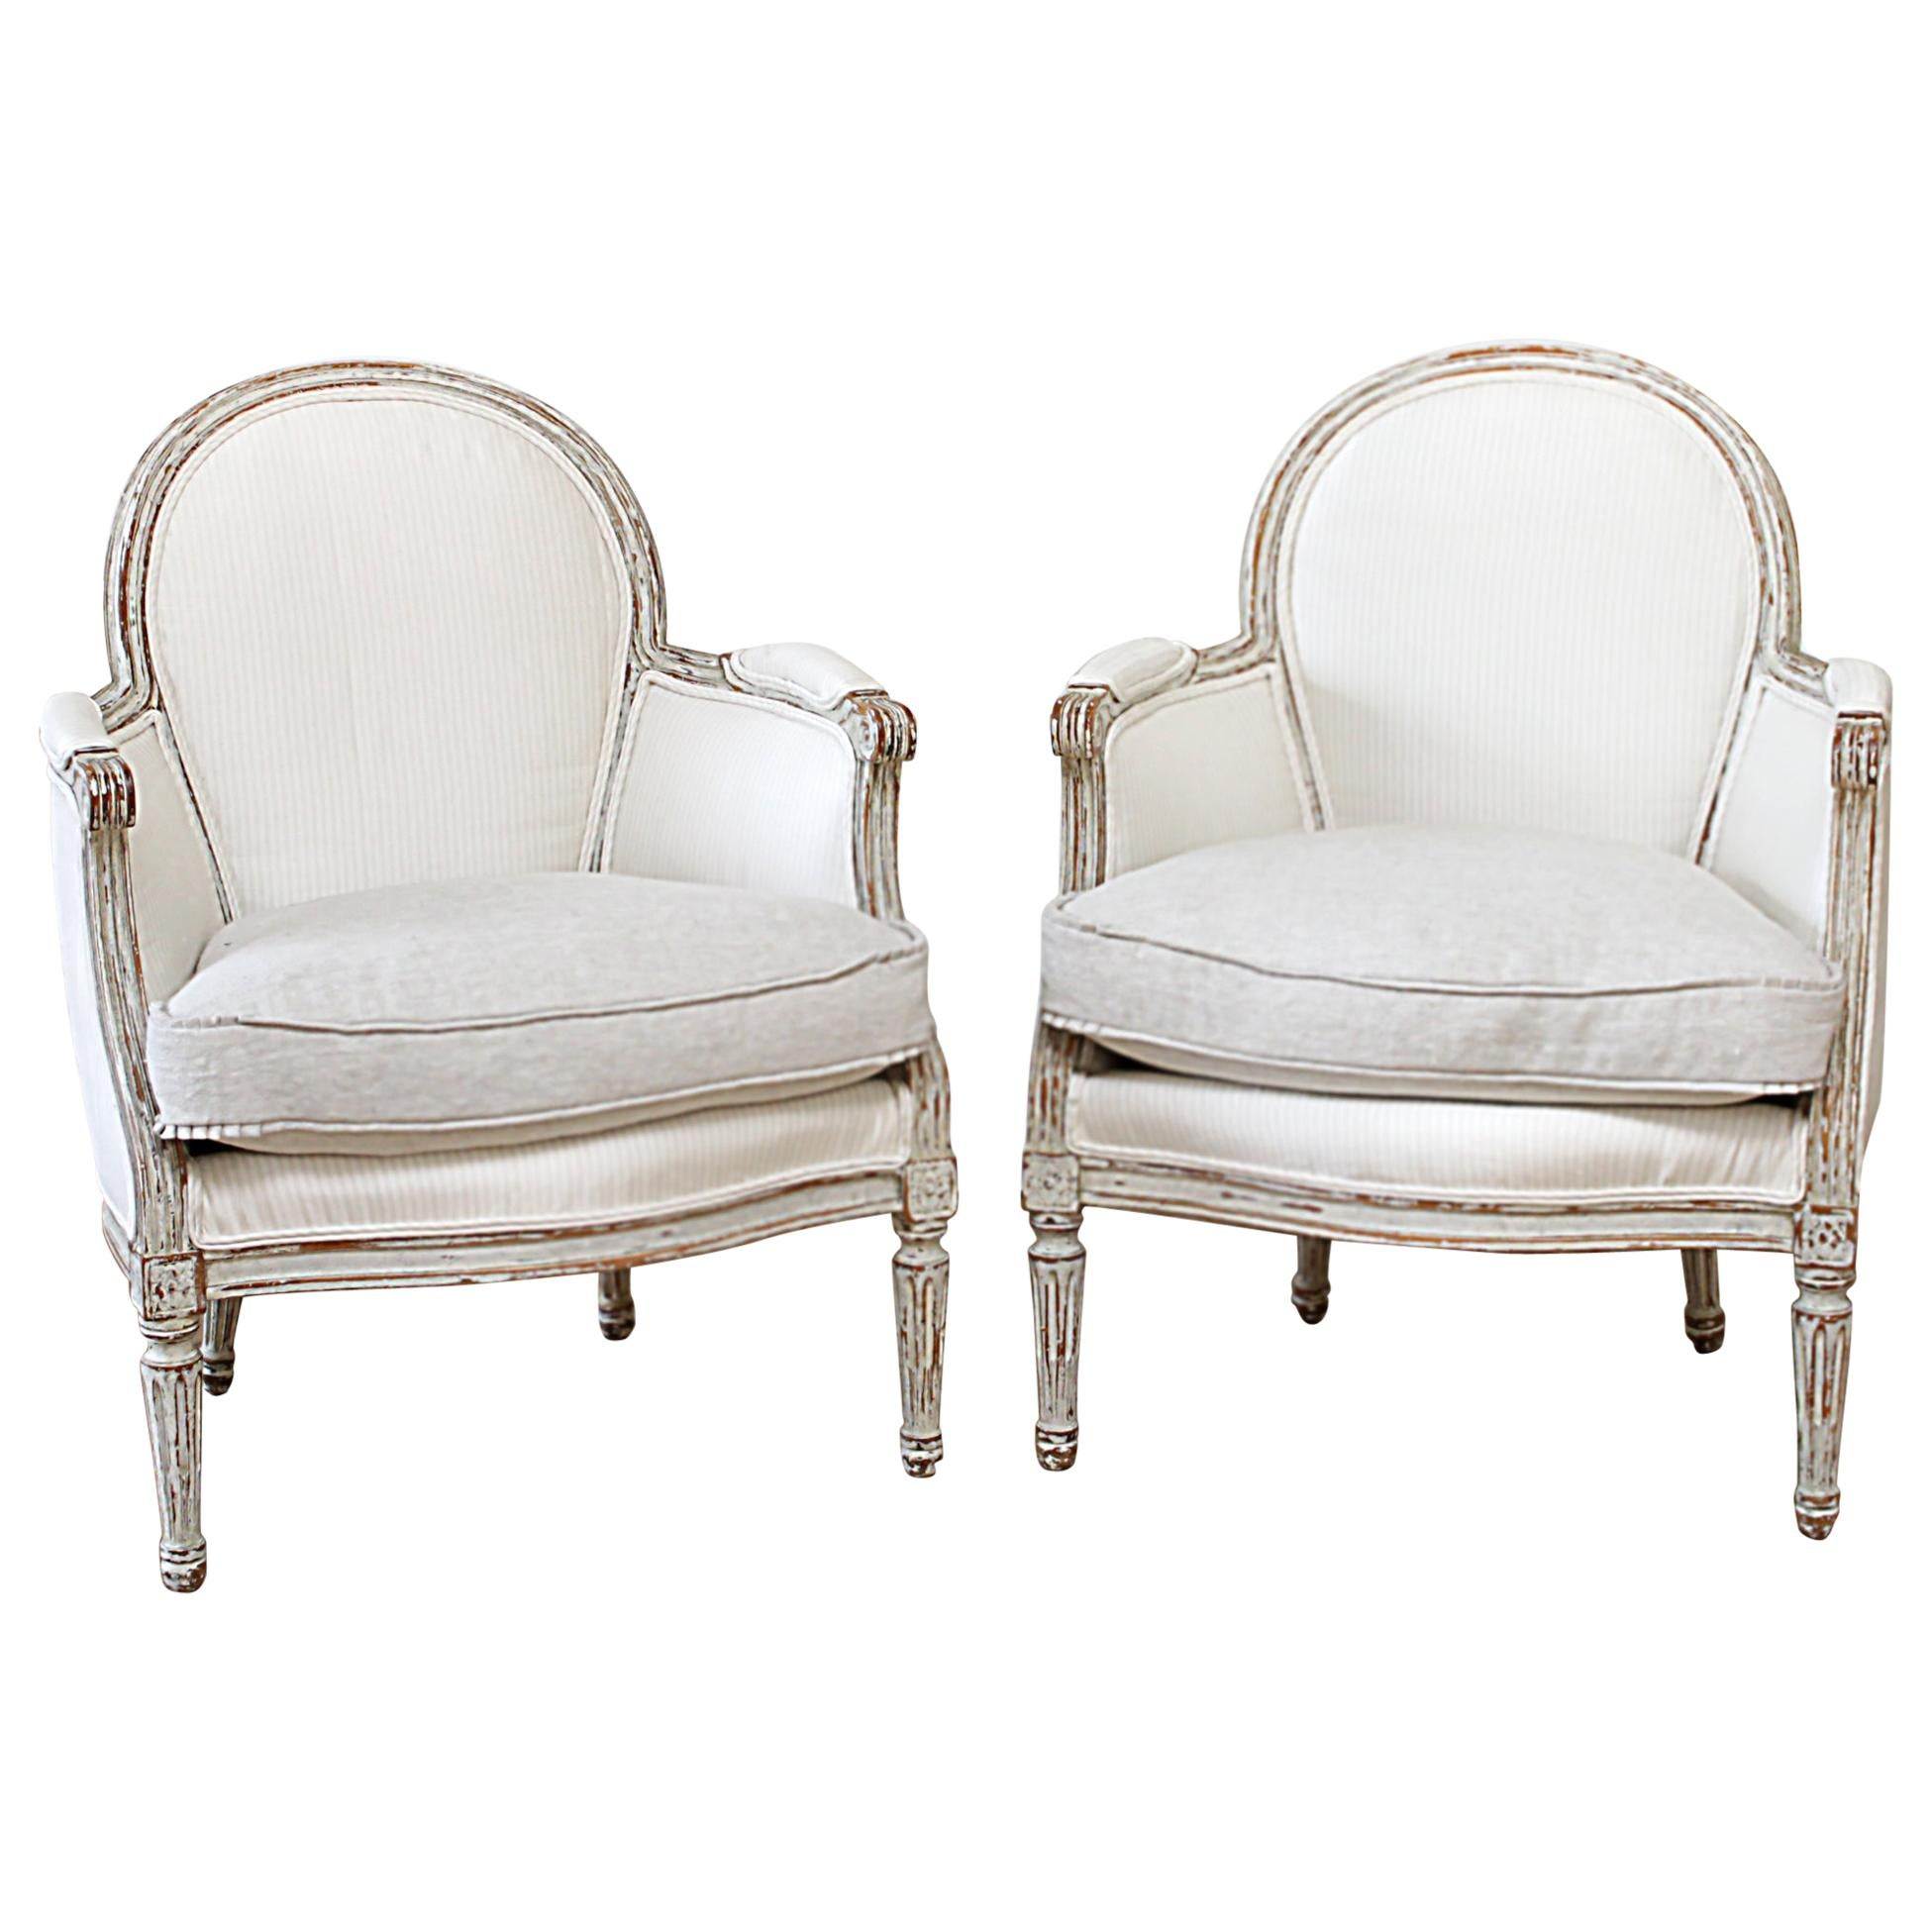 Antique Louis XVI Style Bergère Chairs in Silk and Linen Upholstery